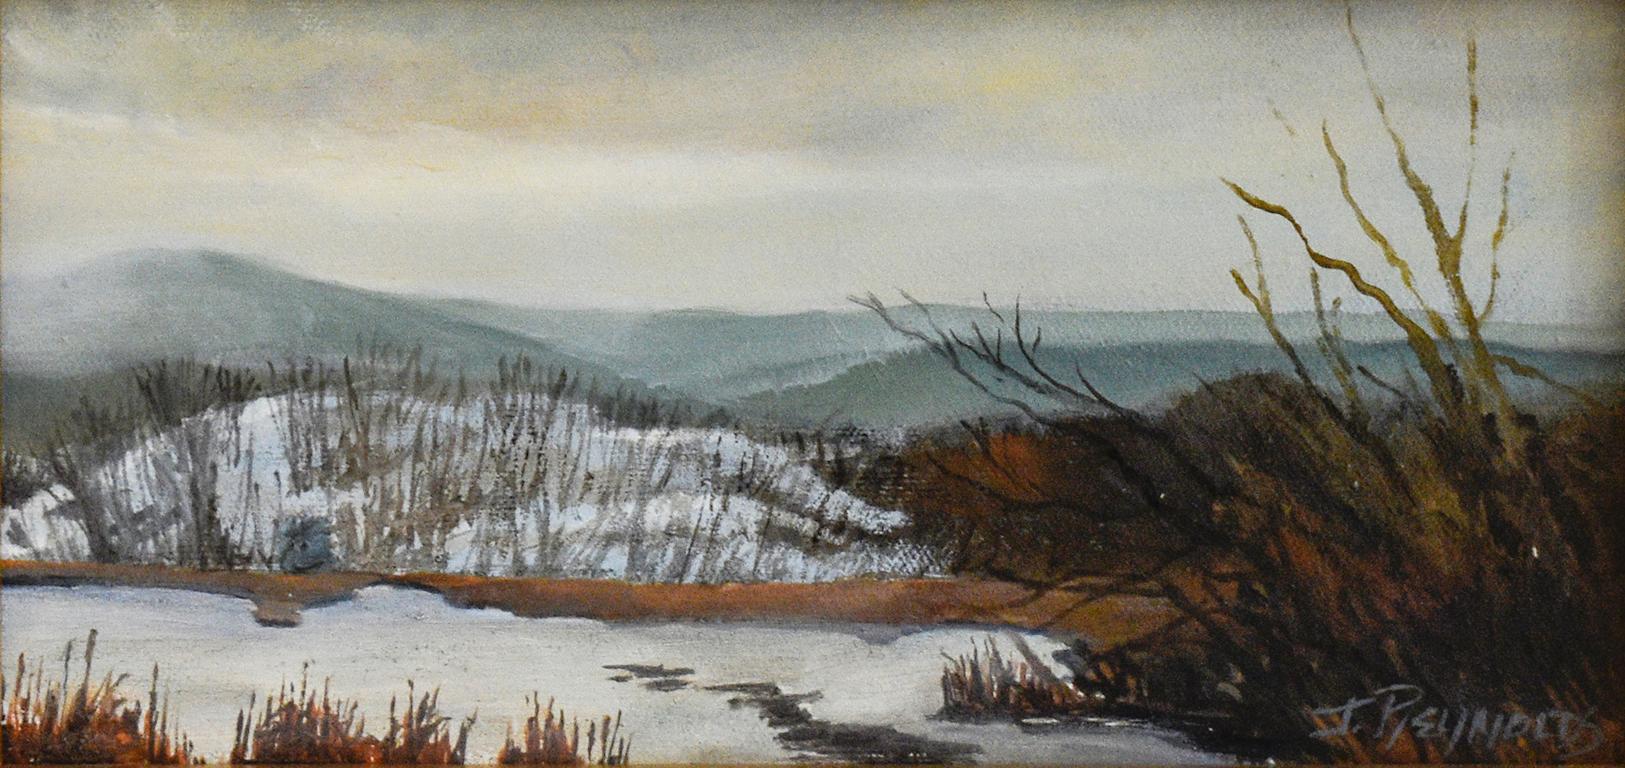 Last Snow, Iona Marsh (Landscape Painting of Country Winter Scene, Gold Frame)